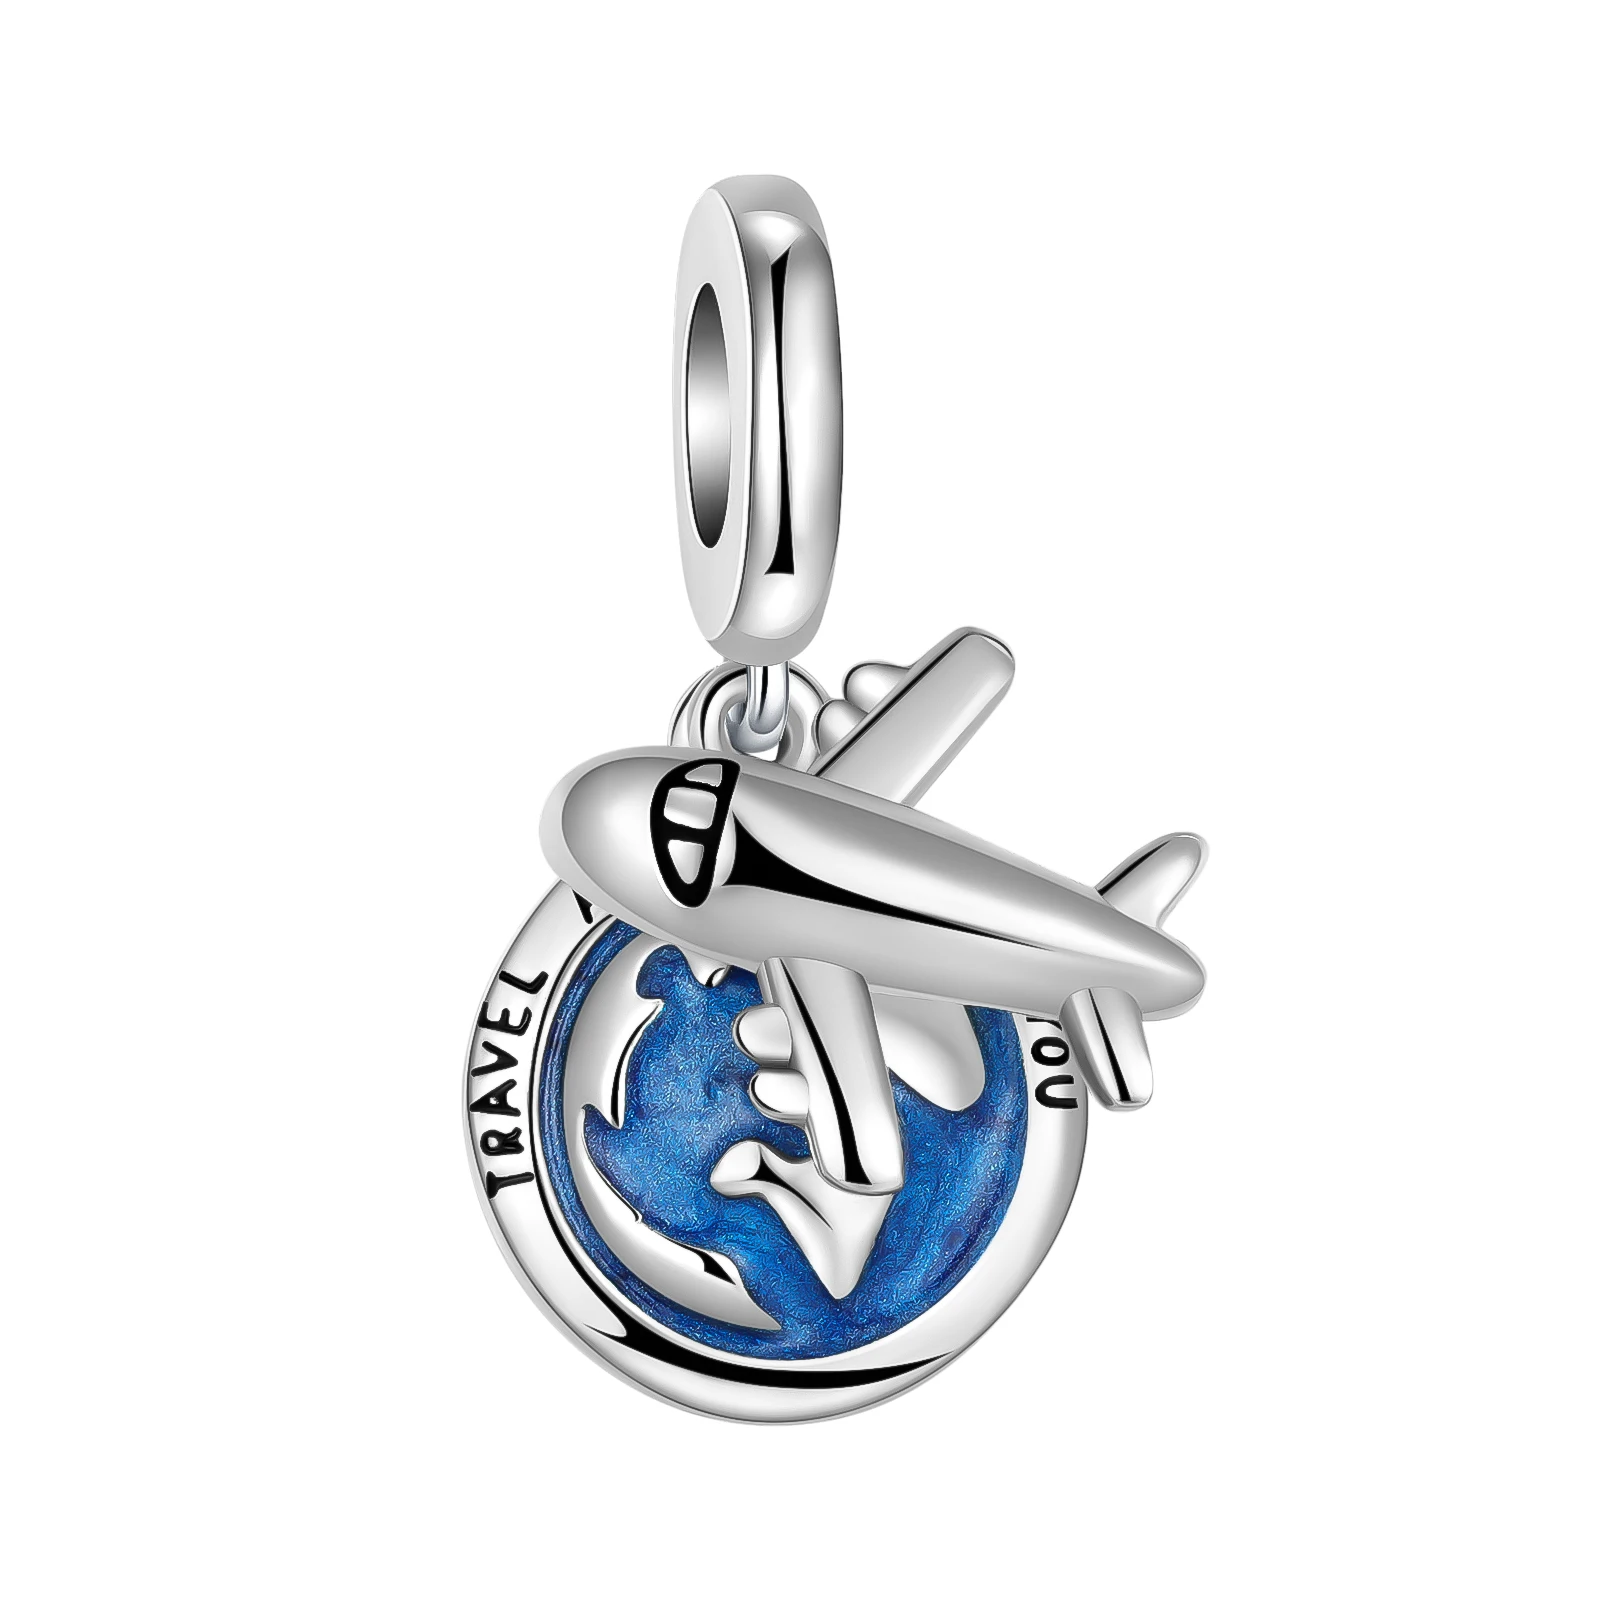 

925 Sterling Silver Travel Series Aircraft Earth Blue Pendant Charm Fit Original Pandora Charms Bracelets Women DIY Jewelry Gift